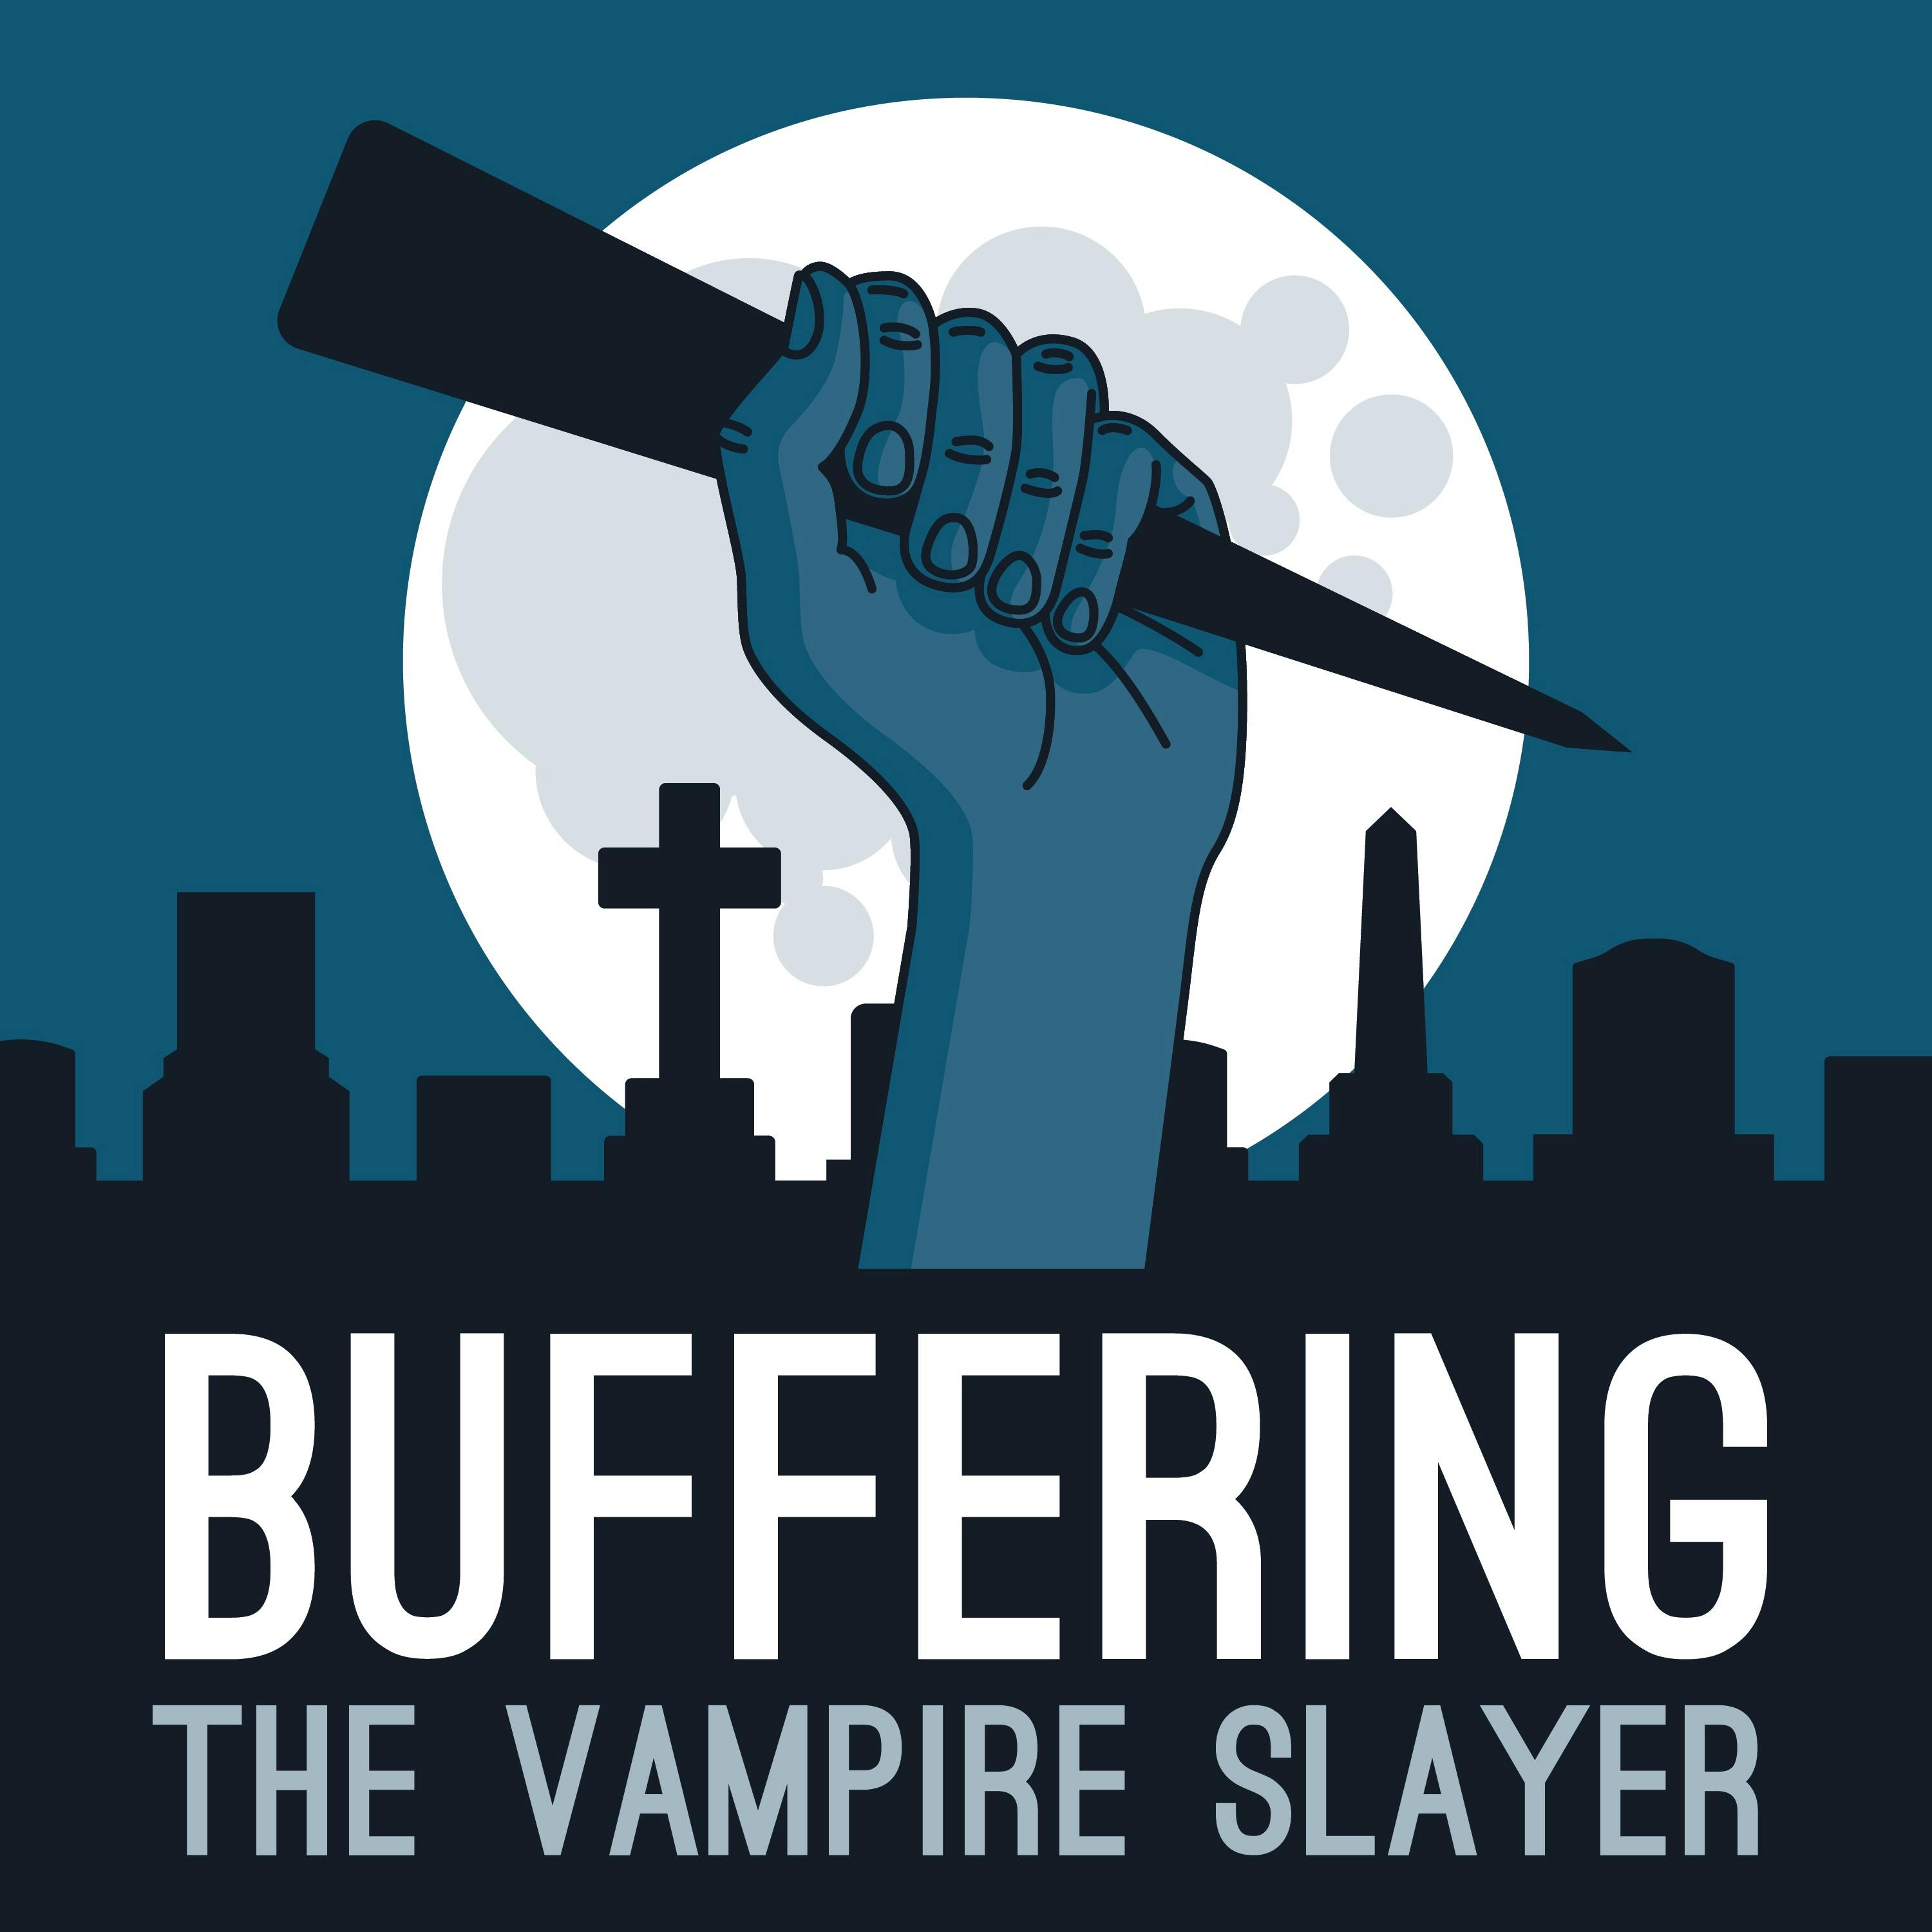 Re-Broadcast: Buffering the Vampire Slayer in Conversation with Ira Madison III on 3.20 